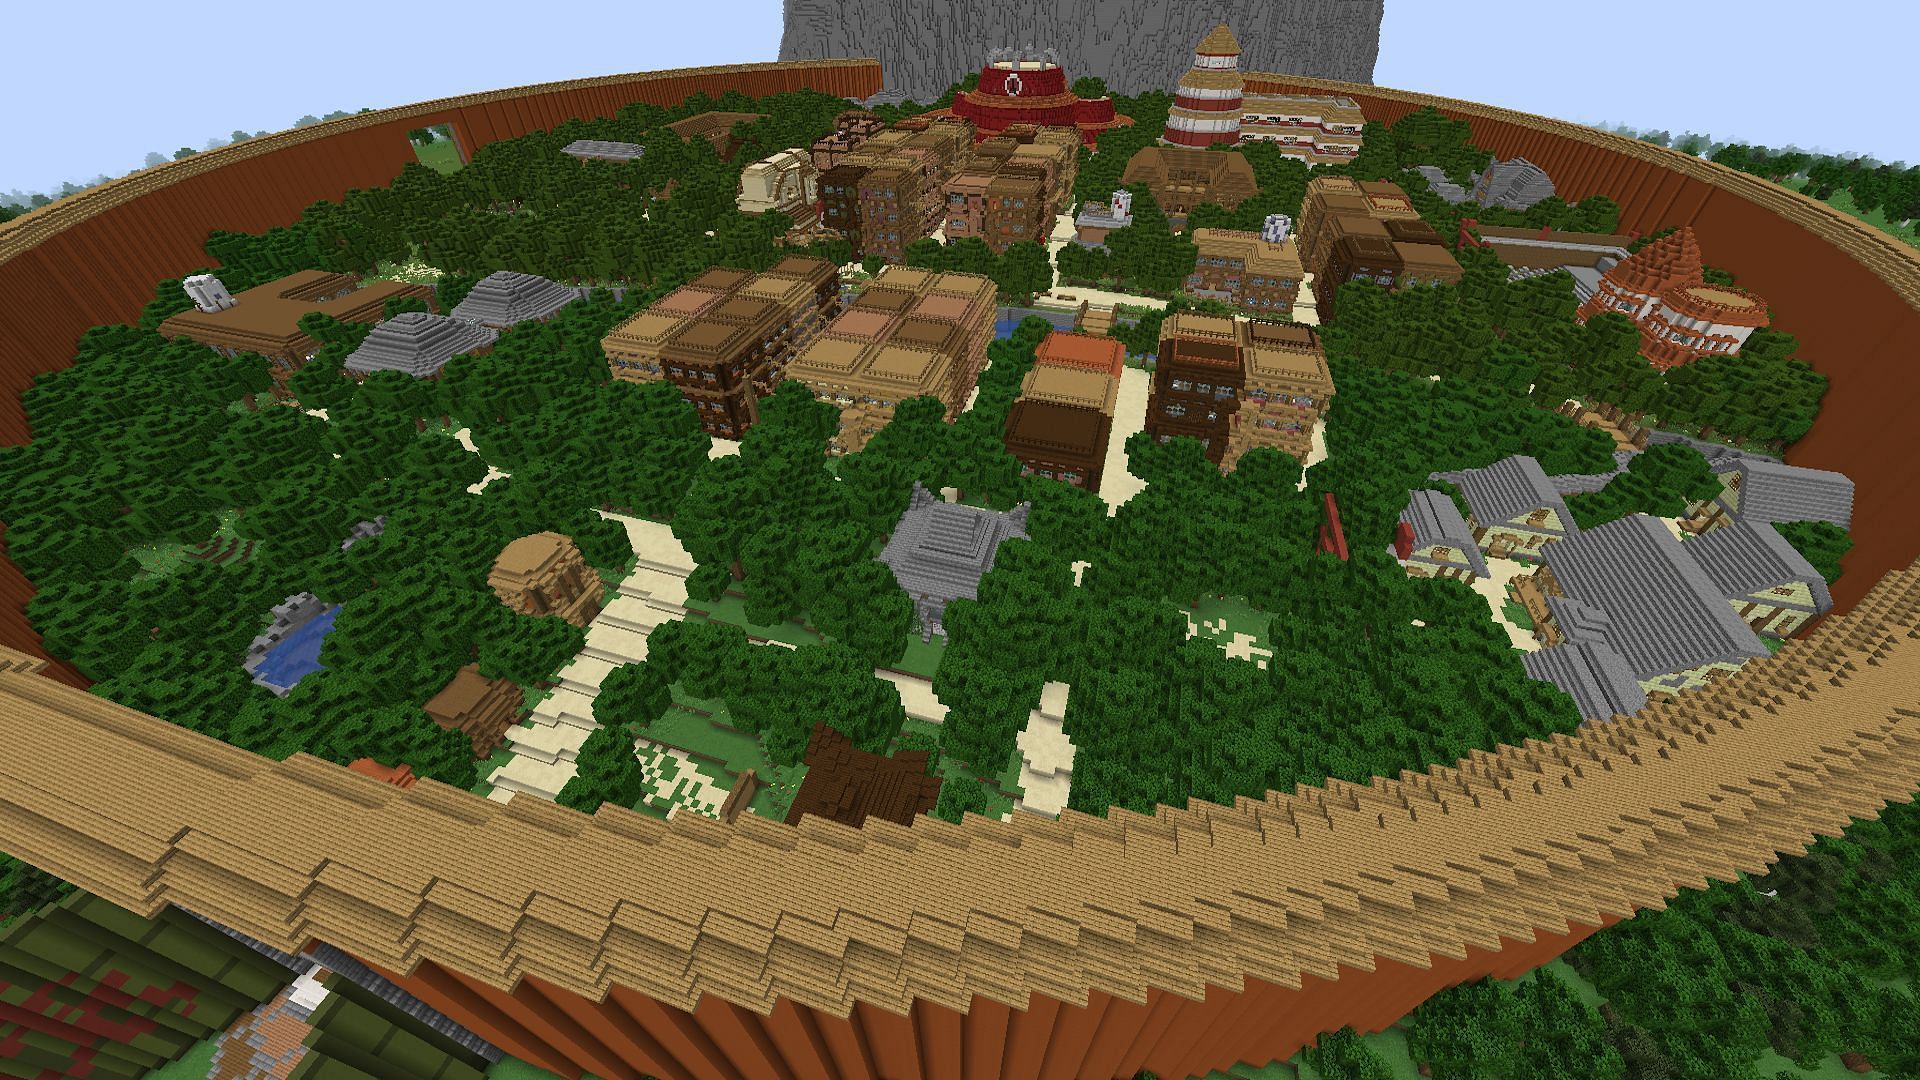 These anime Minecraft builds are impressive in scale and detailing (Image via Mojang)